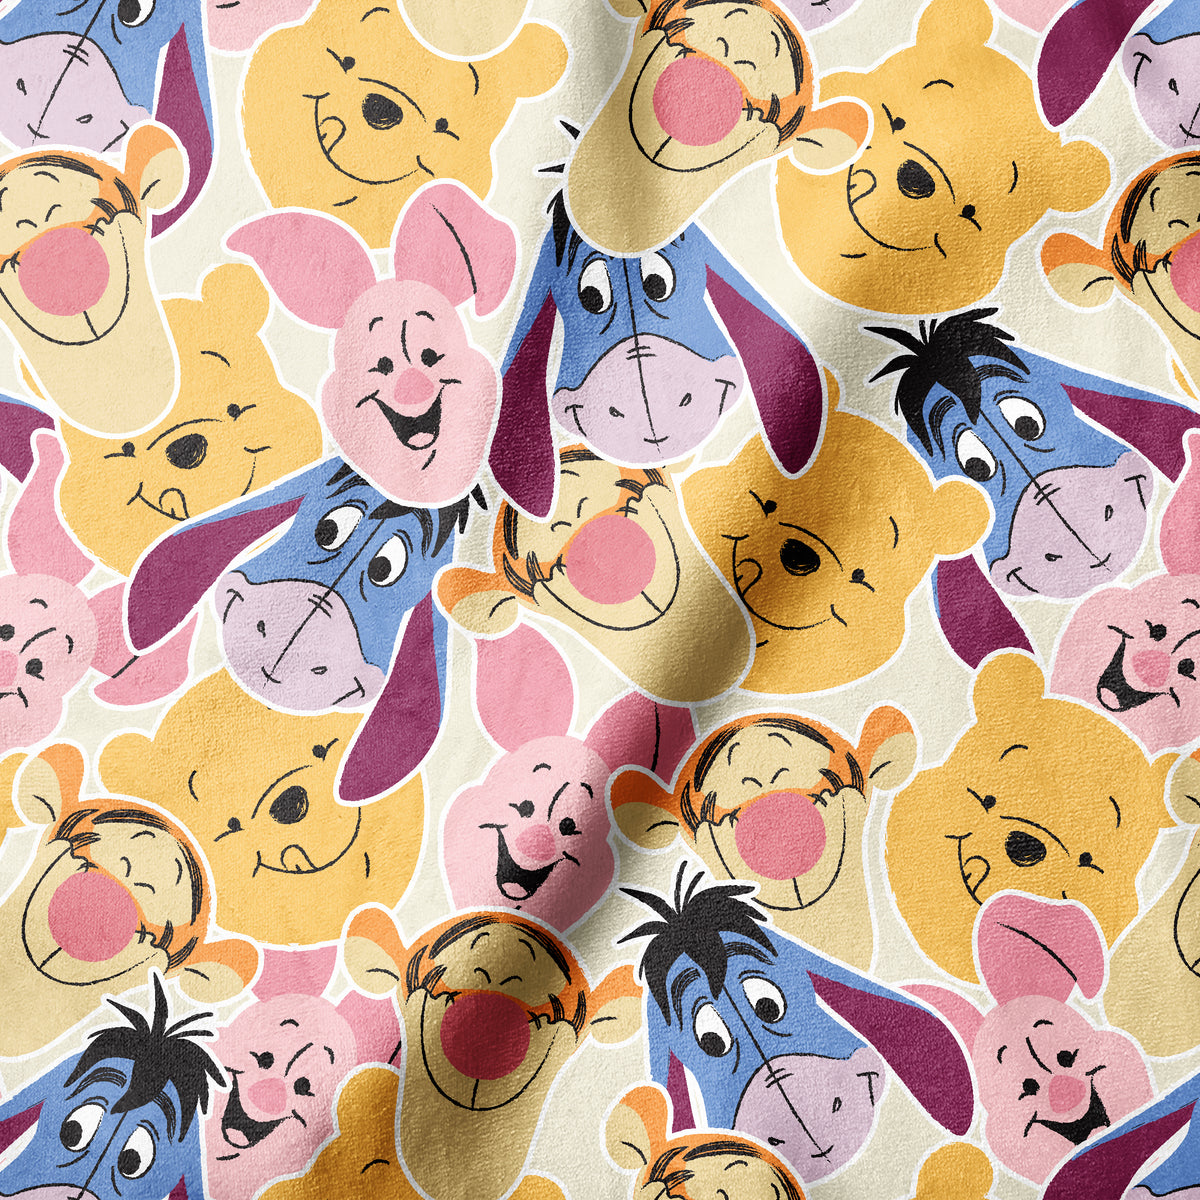 Disney Winnie The Pooh and Friends Fabric by the yard